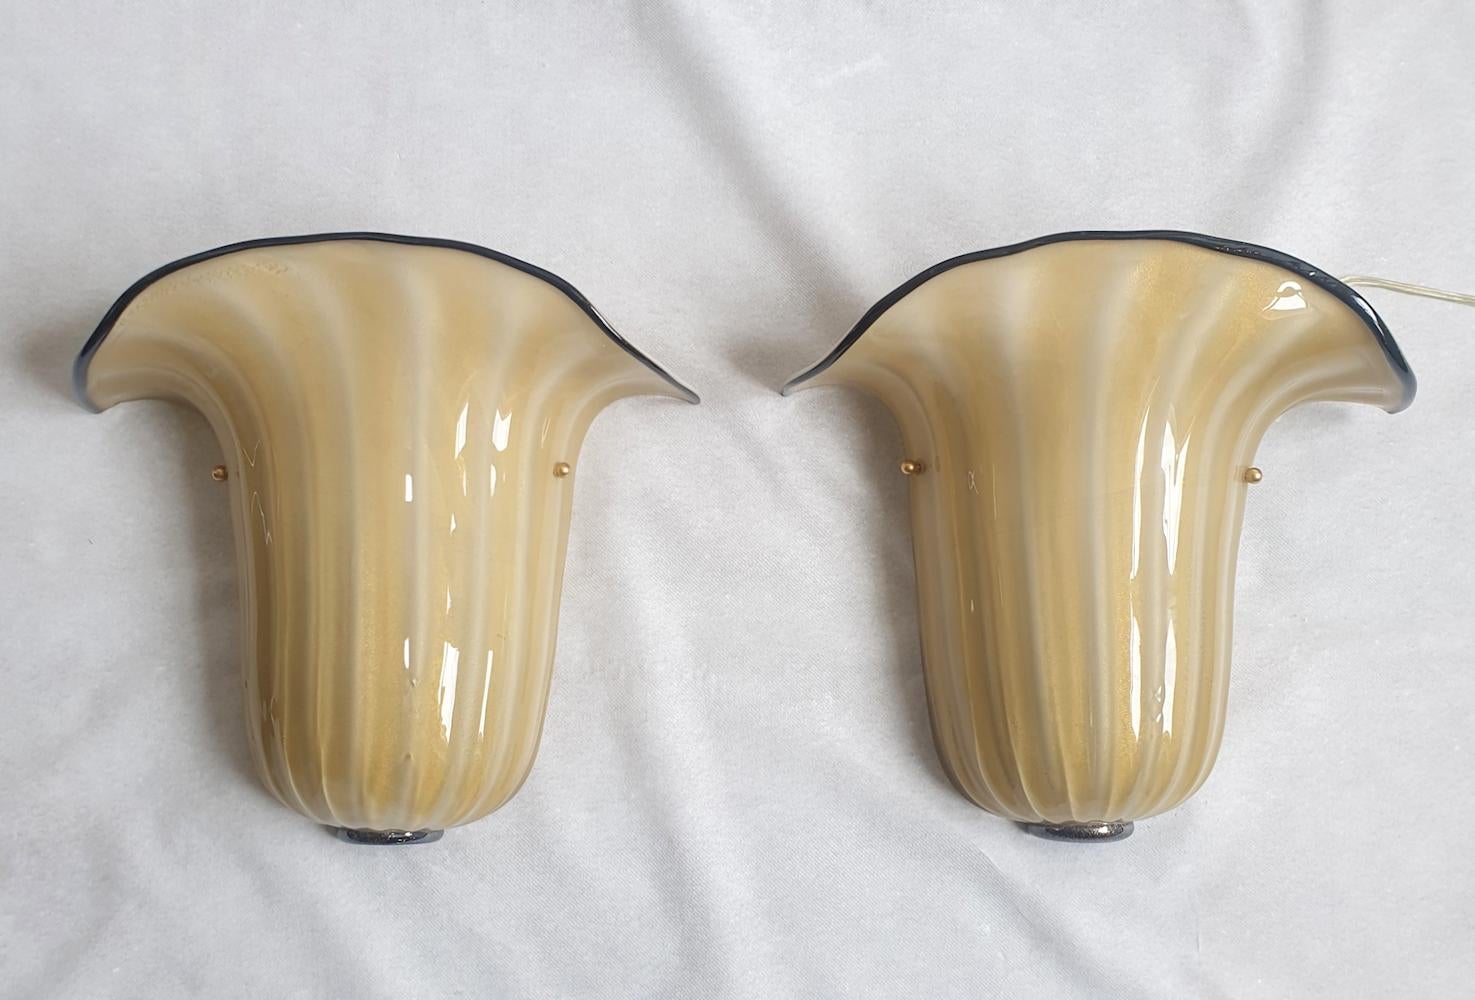 Pair of tulip flower shape Murano glass wall sconces, attributed to Seguso, Italy, circa 1970.
The Mid-Century Modern Murano sconces are translucent, in a beige color, with gold leaf inclusions and a black line accent.
They have brass mounts and